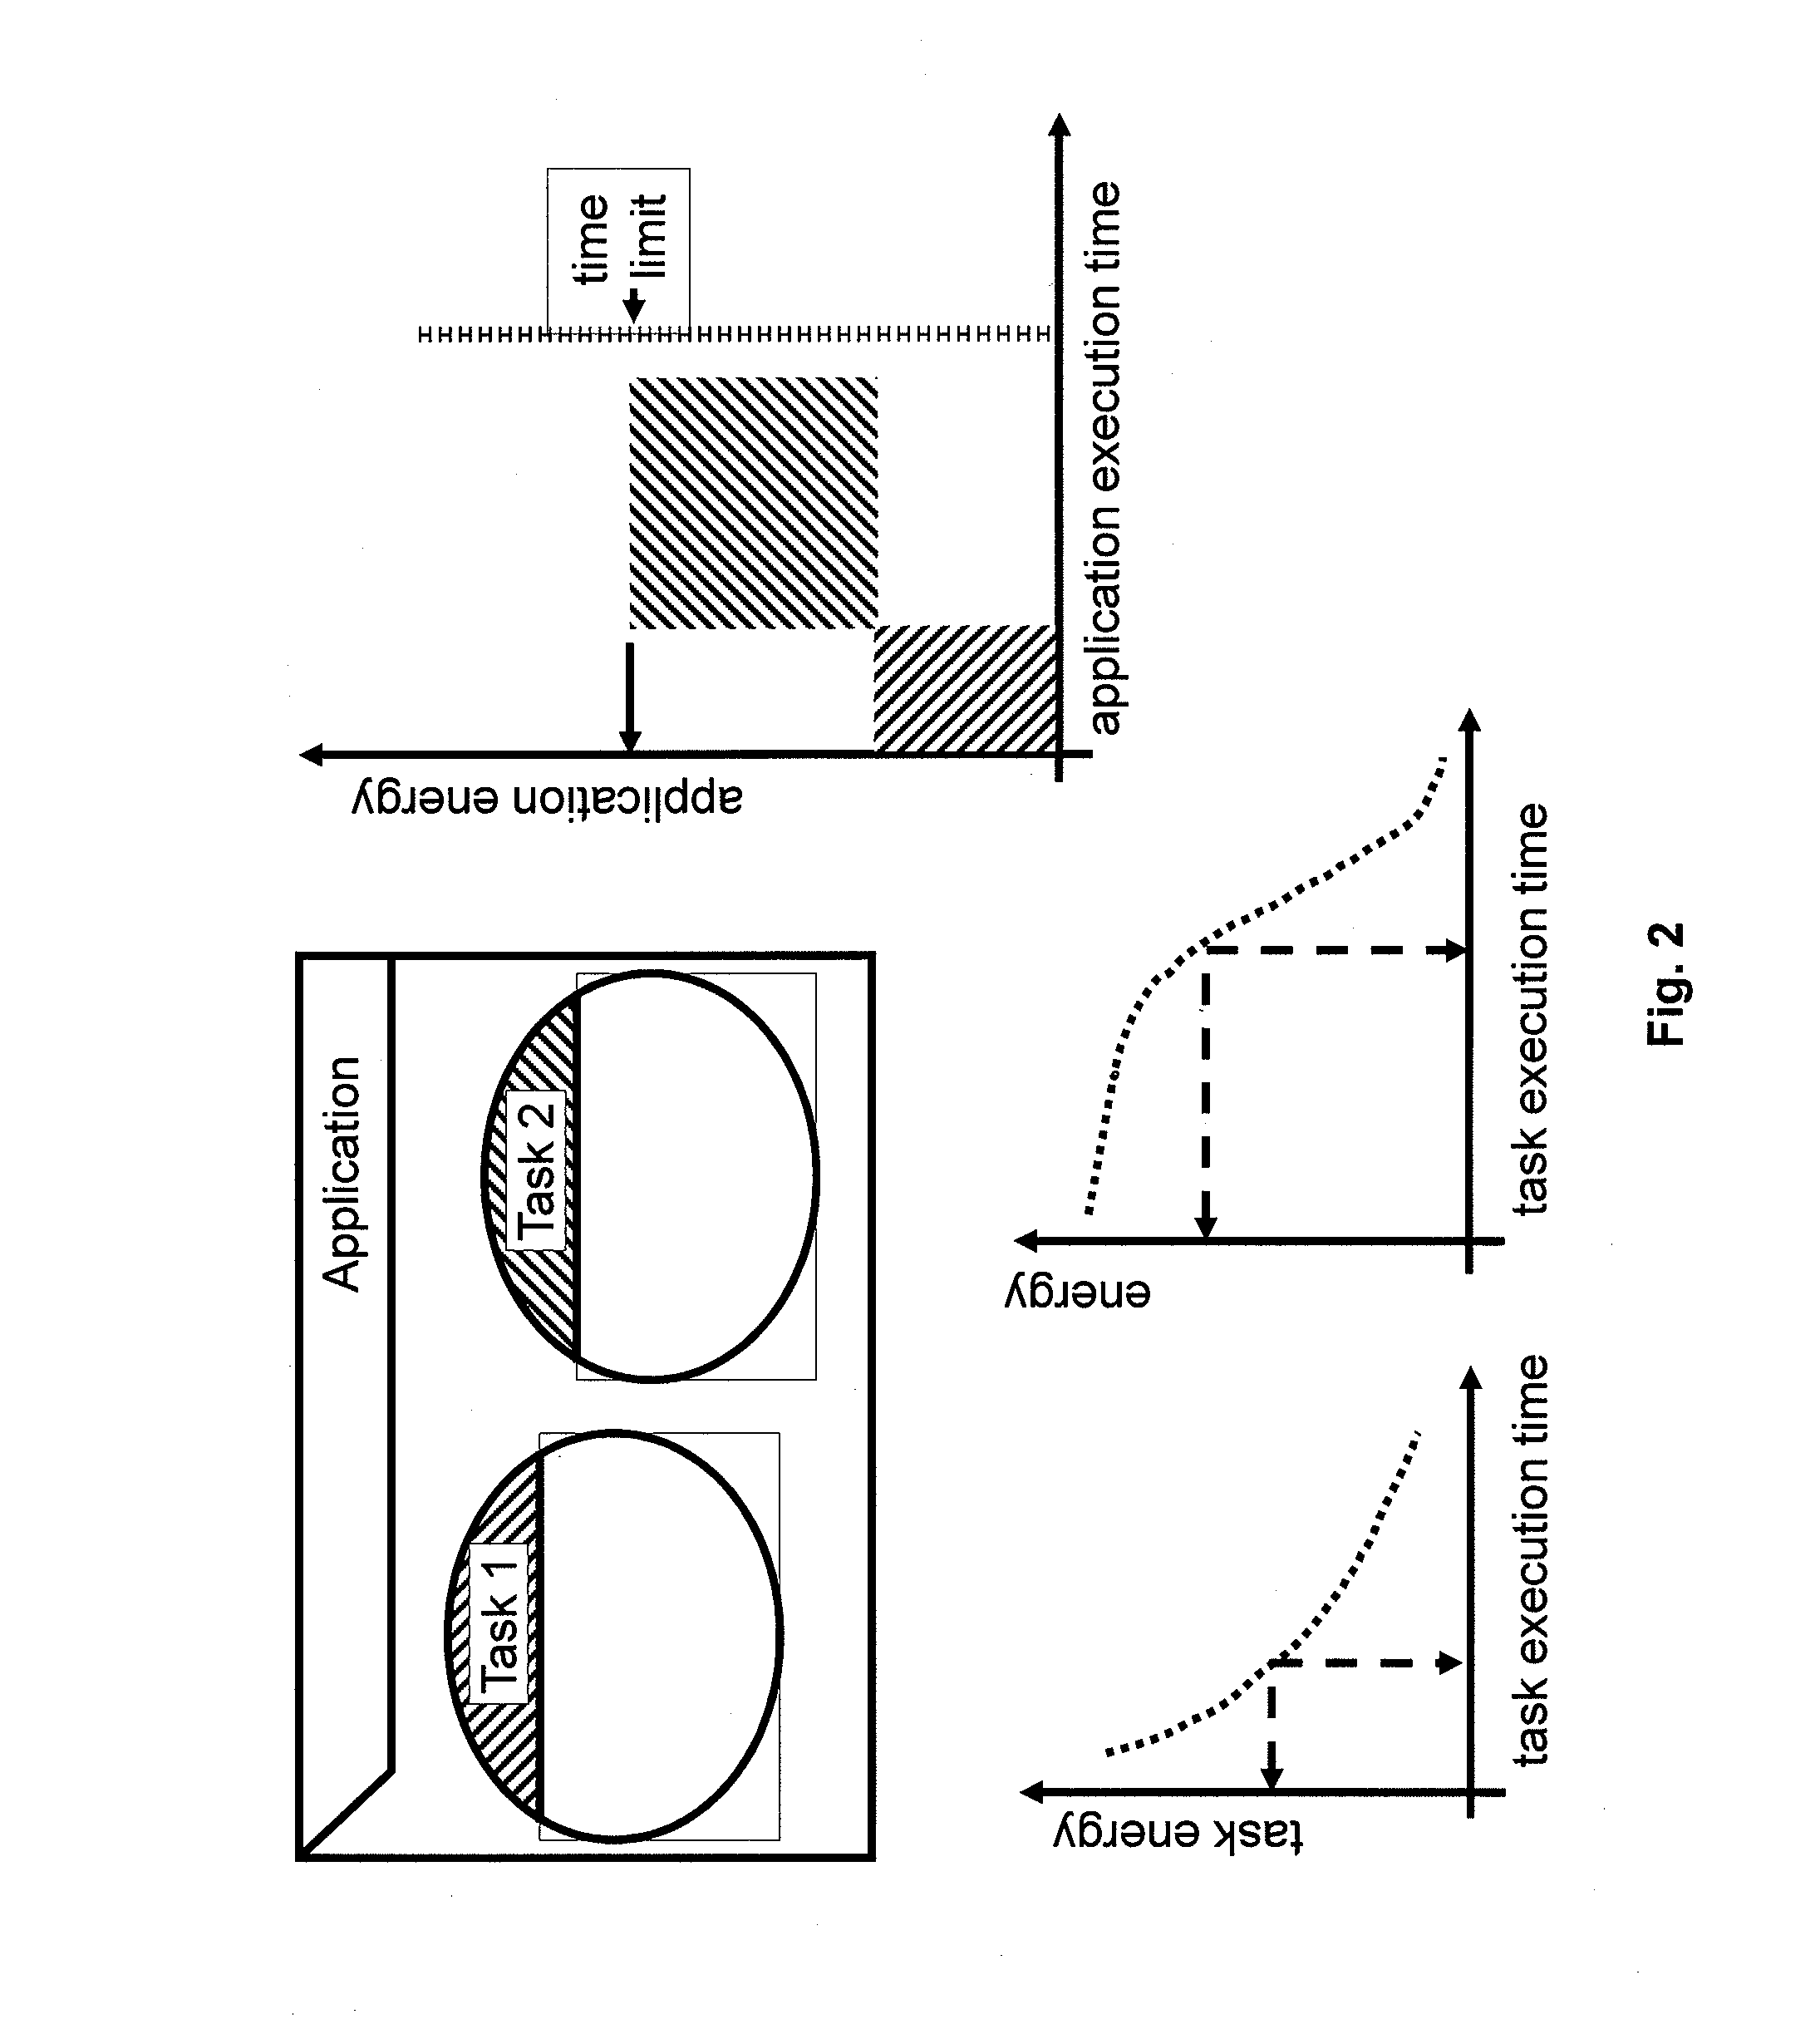 Method and apparatus for designing and manufacturing electronic circuits subject to process variations